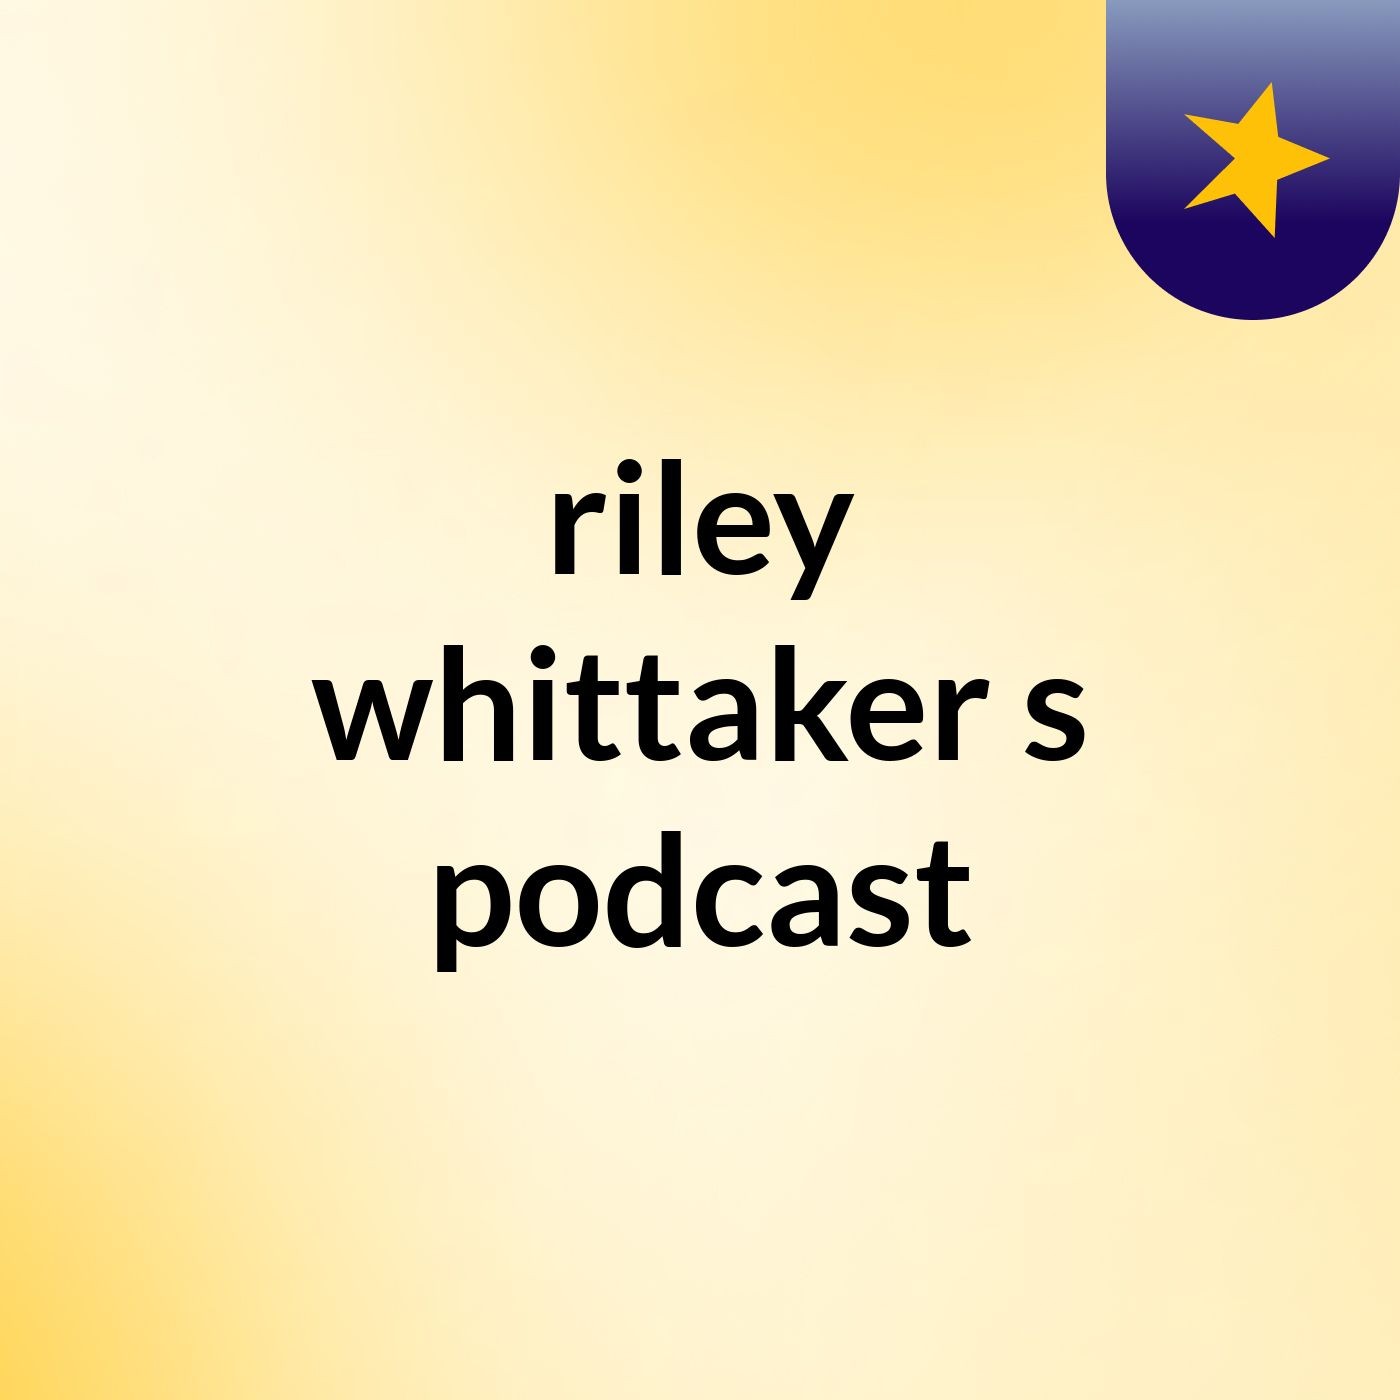 Episode 3 - riley whittaker's podcast